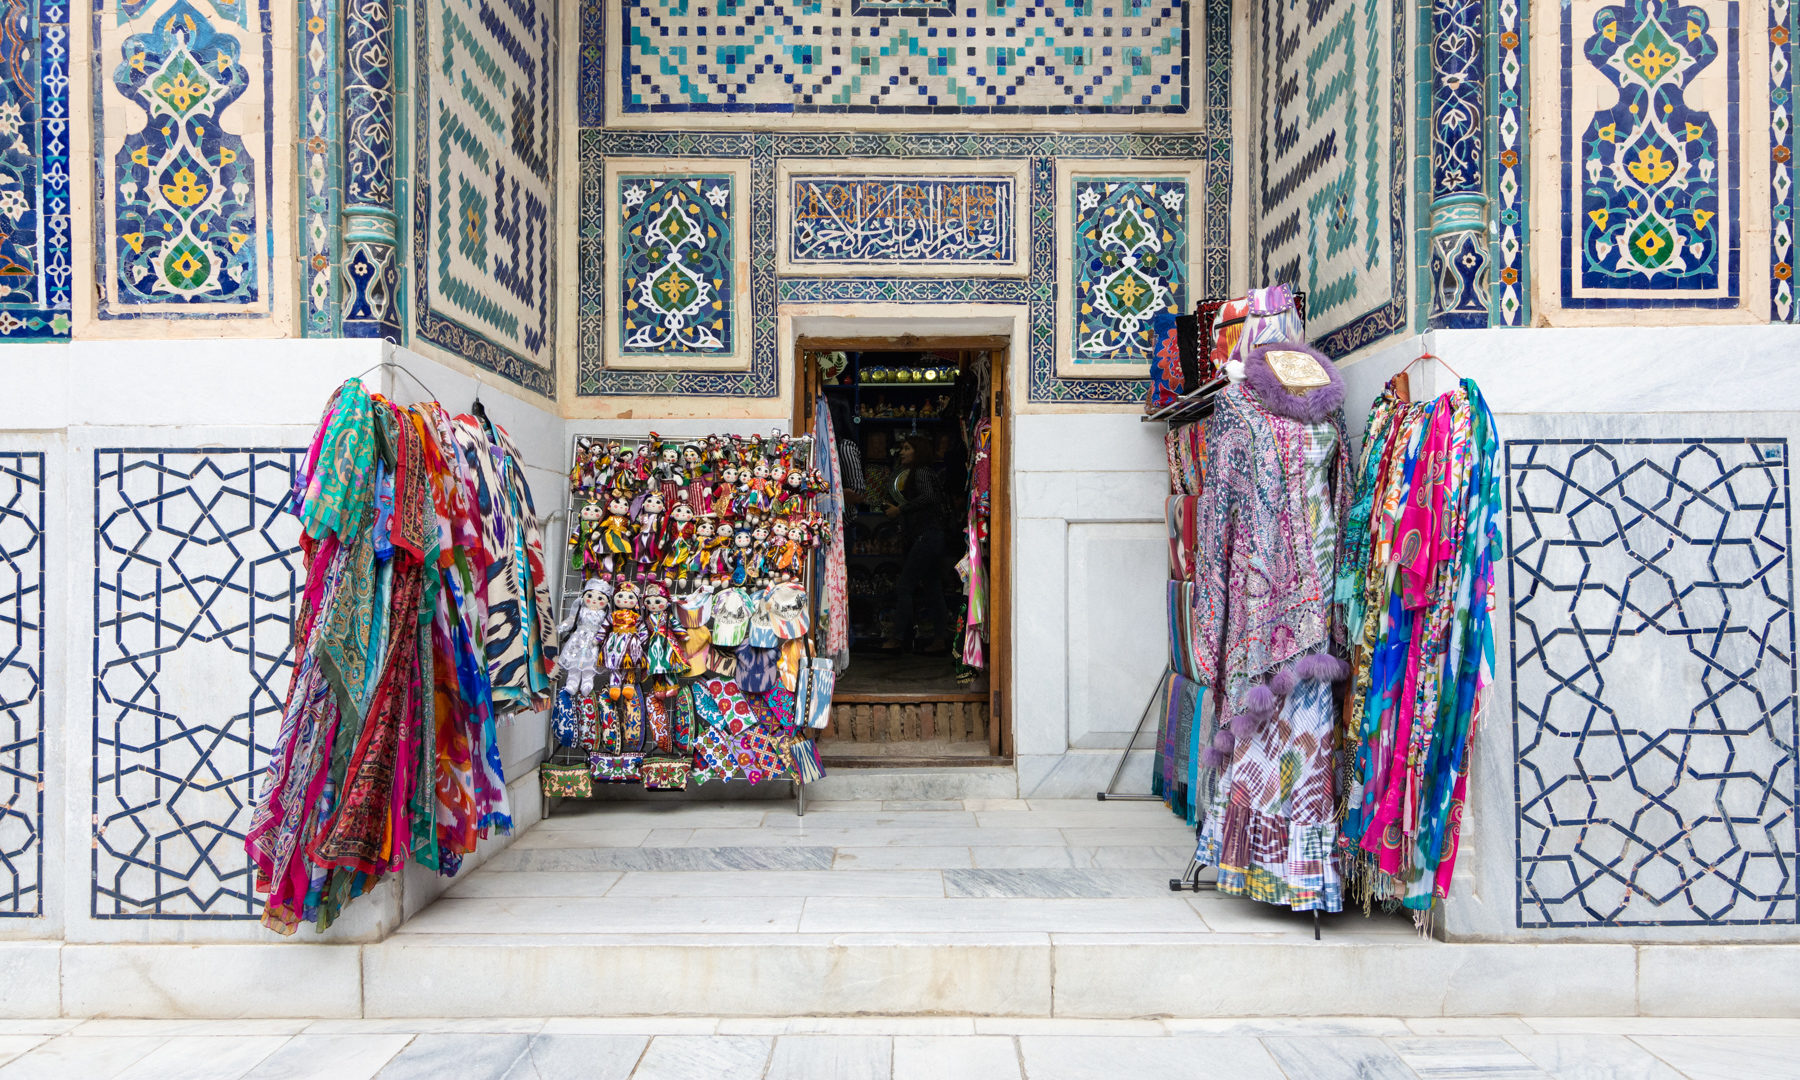 Shopping in Uzbekistan - What Souvenirs to Buy & How Much to Pay